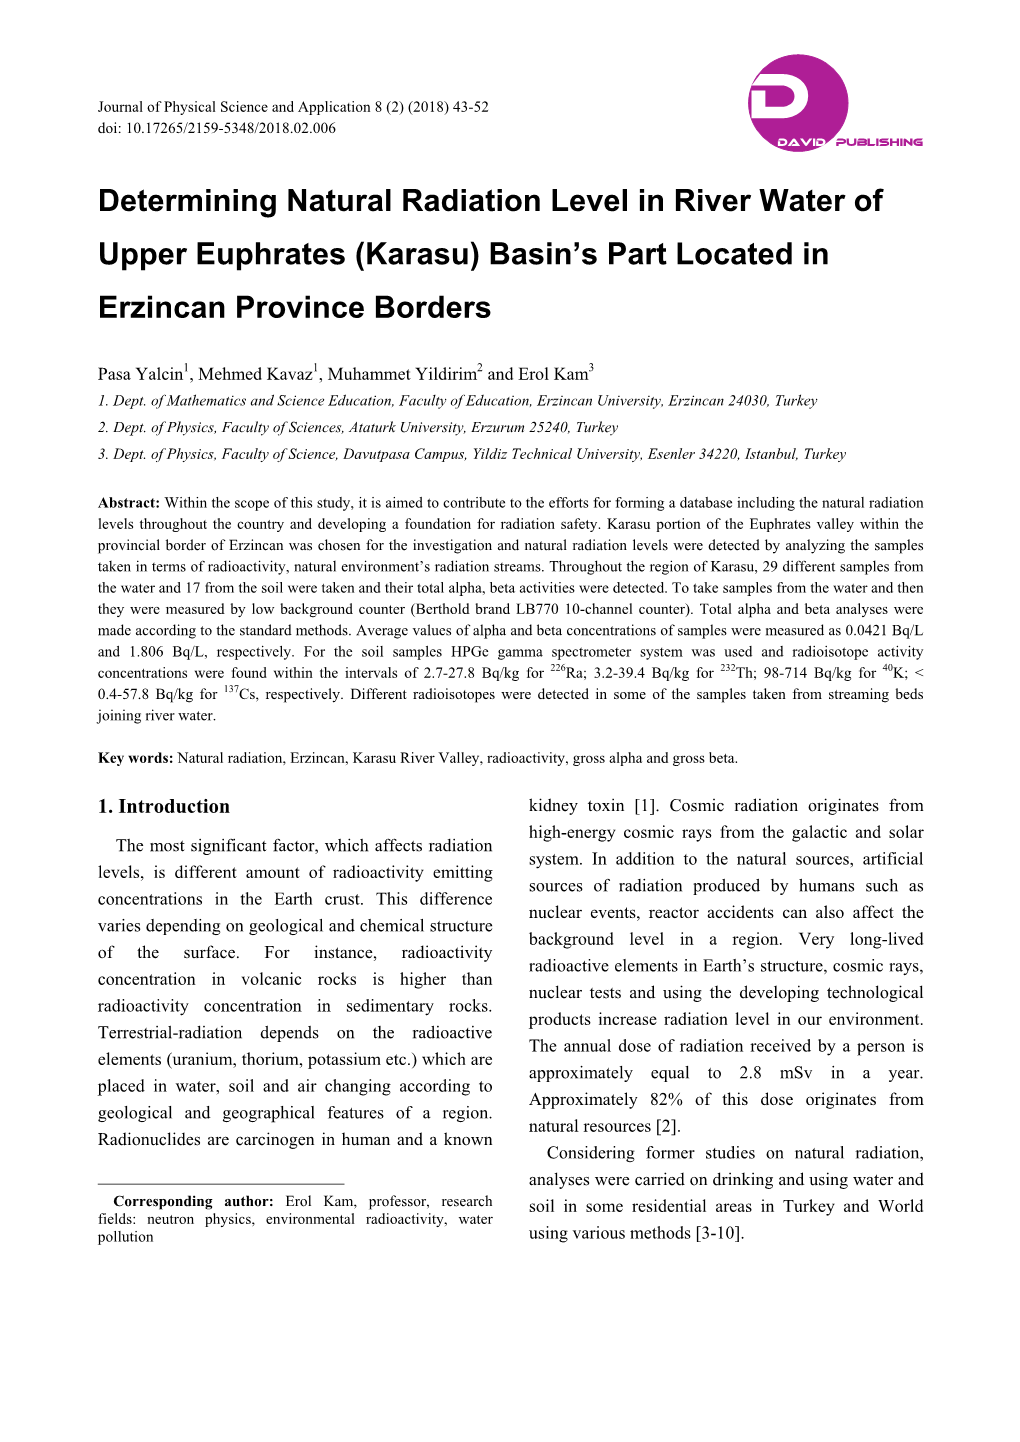 Determining Natural Radiation Level in River Water of Upper Euphrates (Karasu) Basin’S Part Located in Erzincan Province Borders